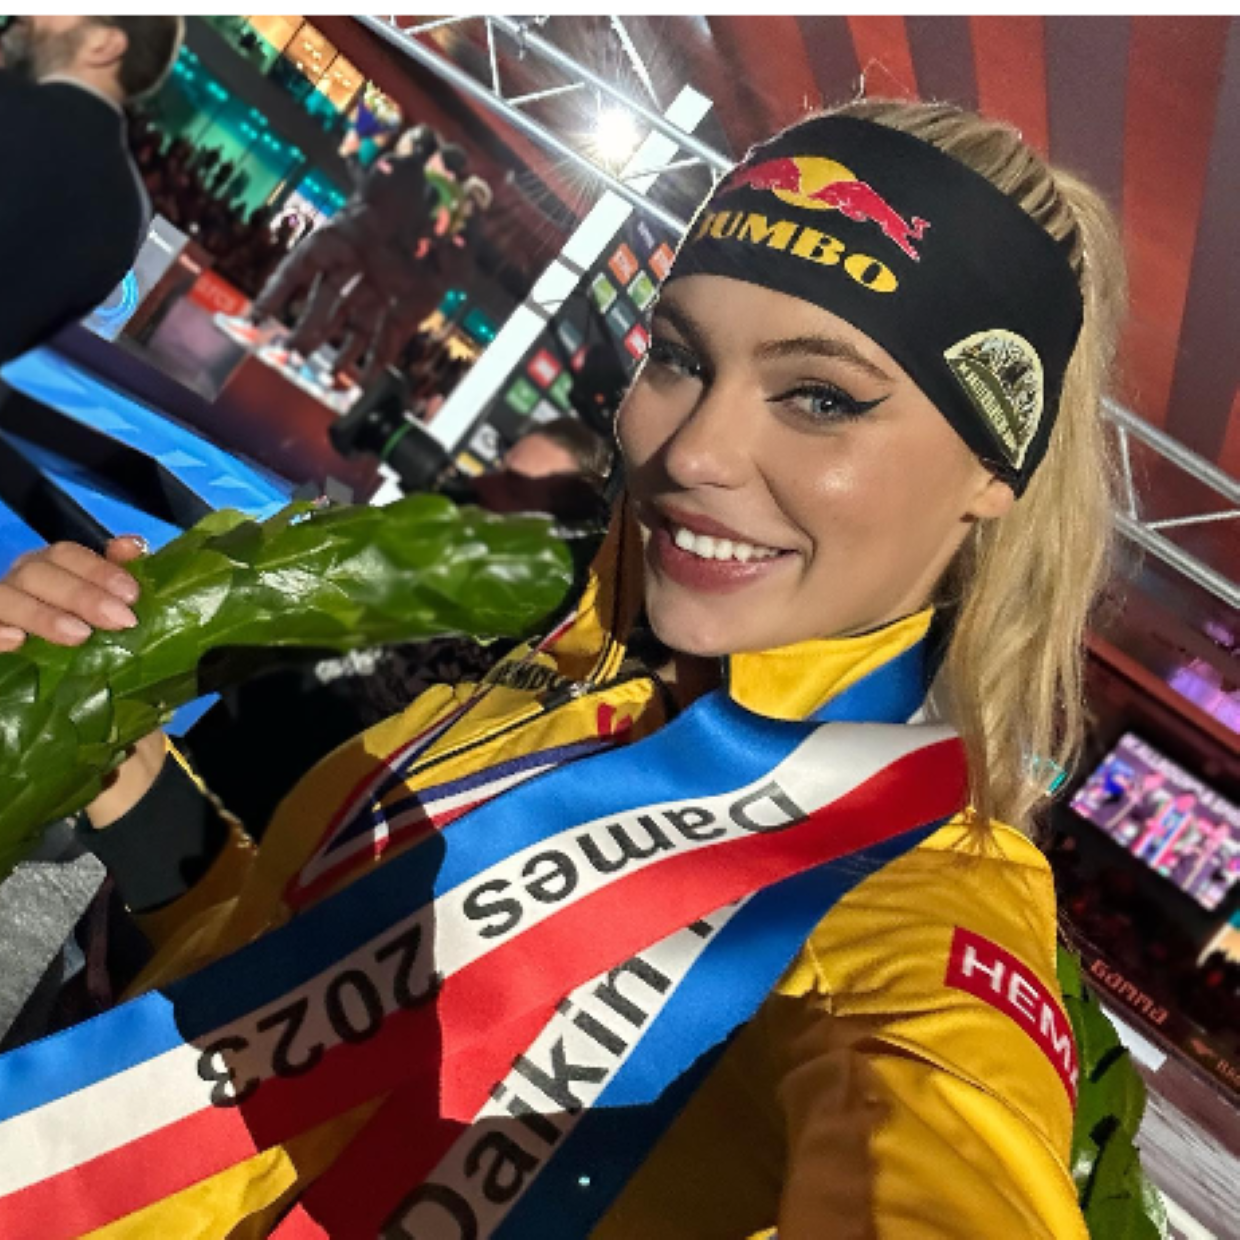 Who is Jutte Leerdam? A look at Jake Paul's six-time speed skating champion girlfriend